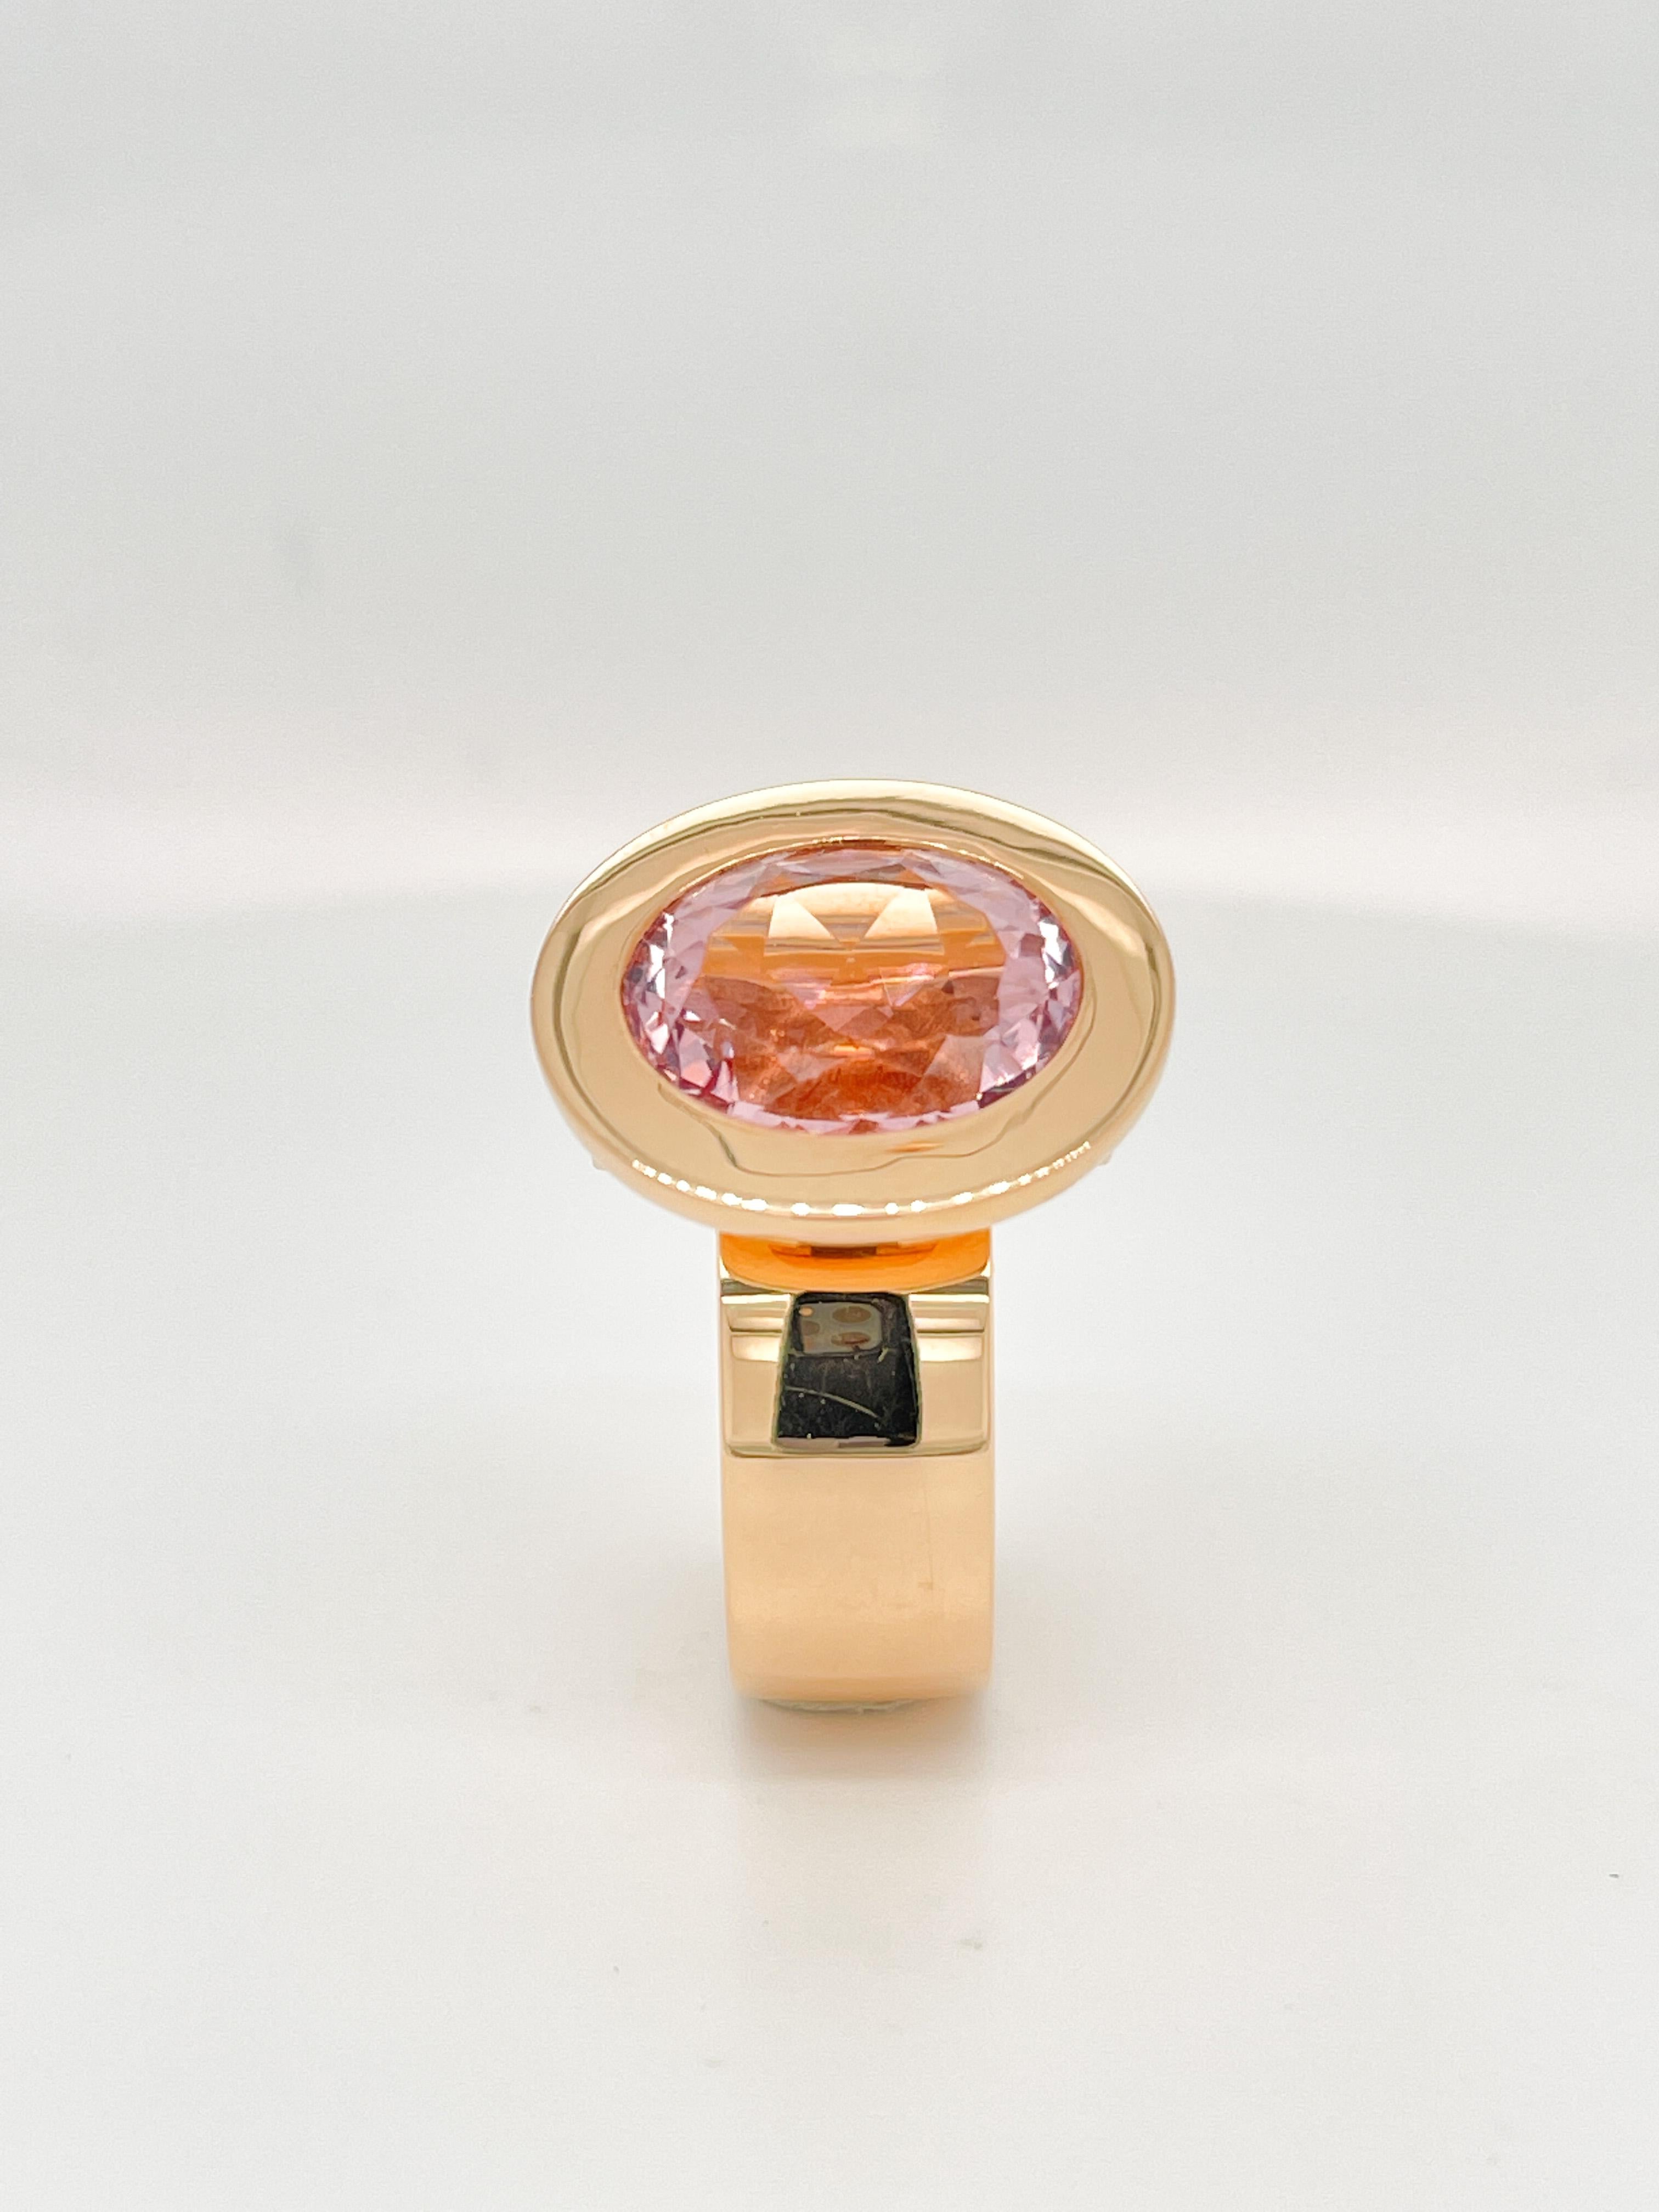 18 Karat Rose Gold Cocktail Ring featuring a 6.14 Carat soft warm morganite stone.

Oval cut measuring 14 x 11mm.
The Morganite is supported by 2 VS1 G diamonds weighing 0,20 ct.

This ring's design is an elegant reimagination of Jochen Leen's